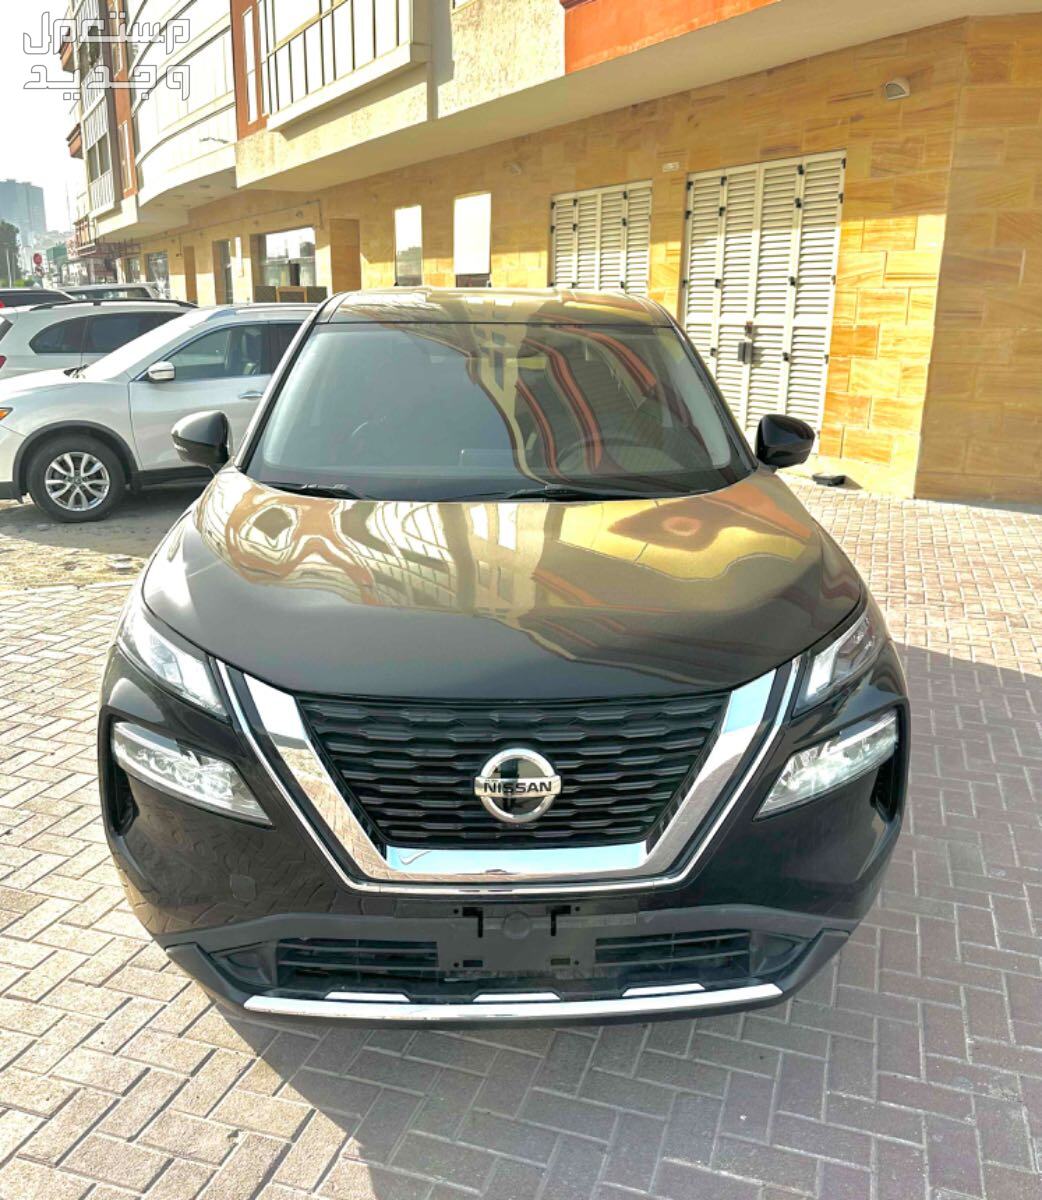 Nissan Rogue 2021 in Dubai at a price of 53 thousands AED